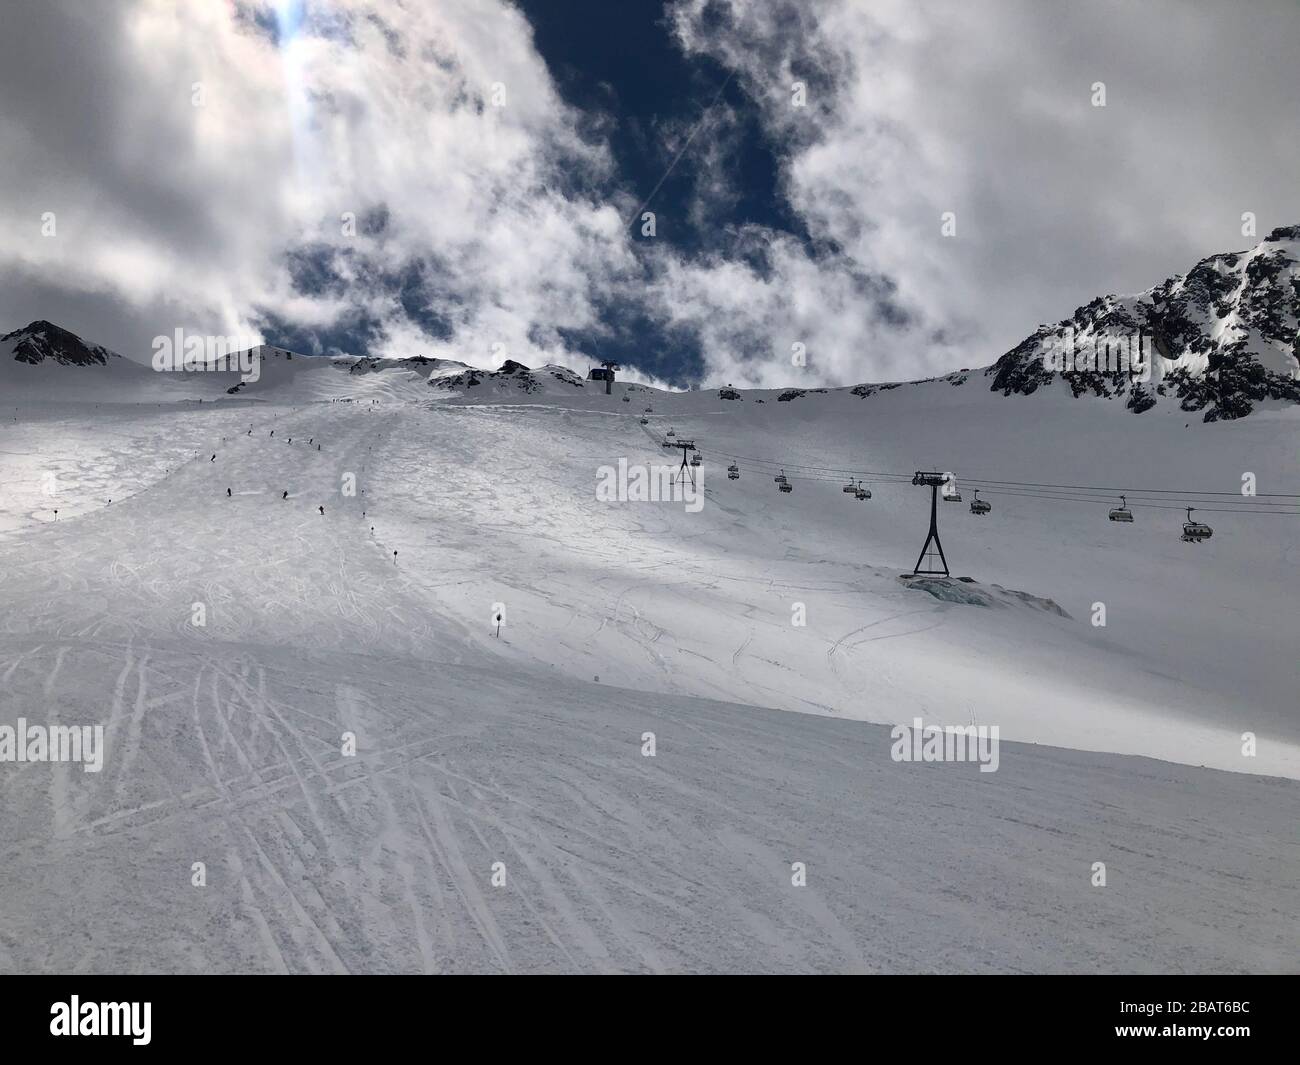 Panorama view of ski resort with slope, people on the ski lift, skiers on the piste among white snow Stock Photo